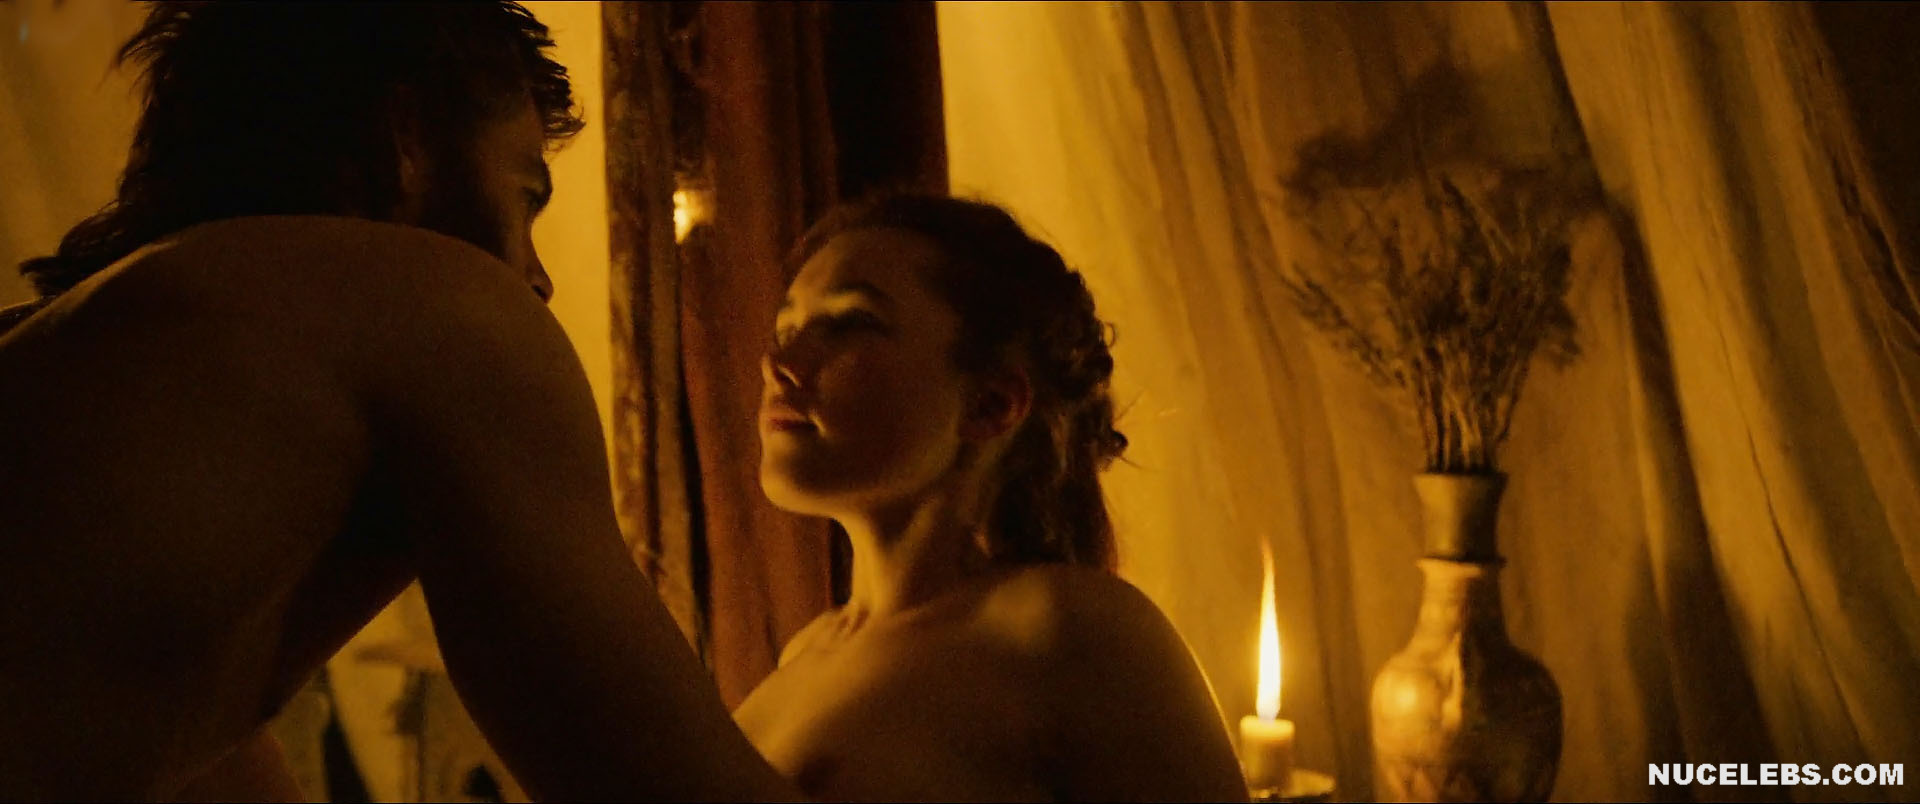 1637352946 992 6. Leaked Florence Pugh Nude Sex Scenes from Outlaw King 22....